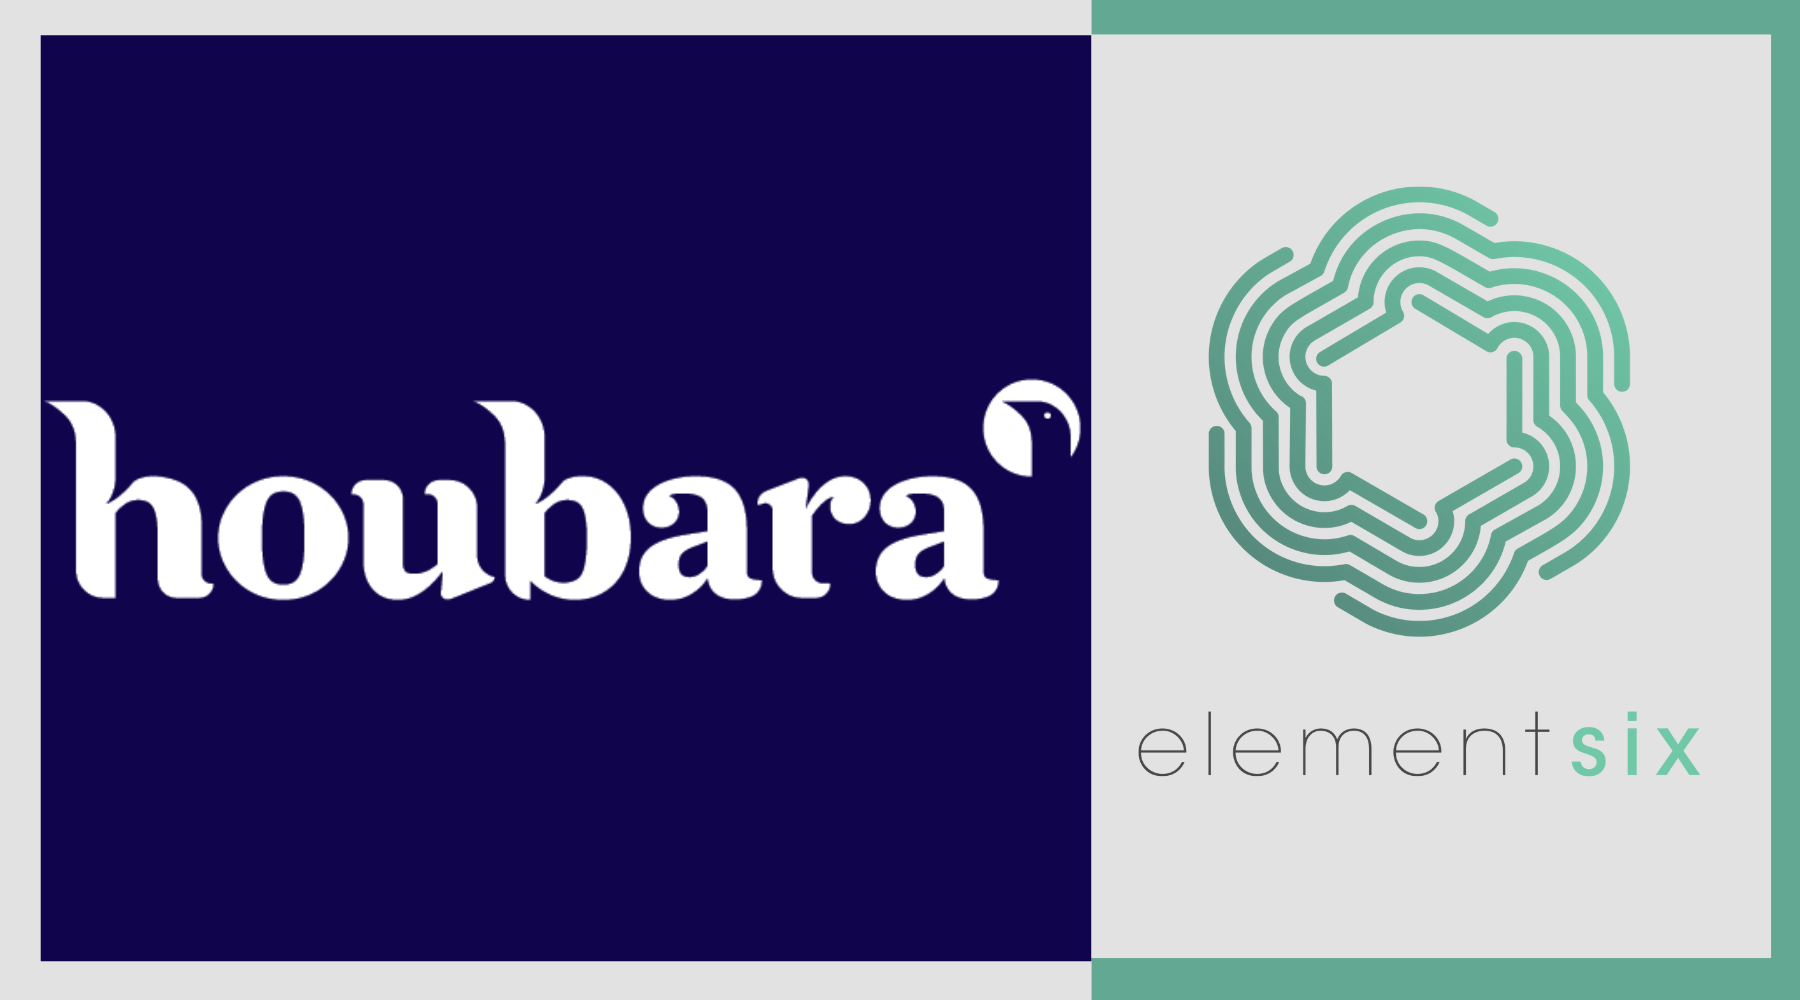 Houbara Partners with Carbon Management Expert, Elementsix, to Bring Authenticity to ESG Communications